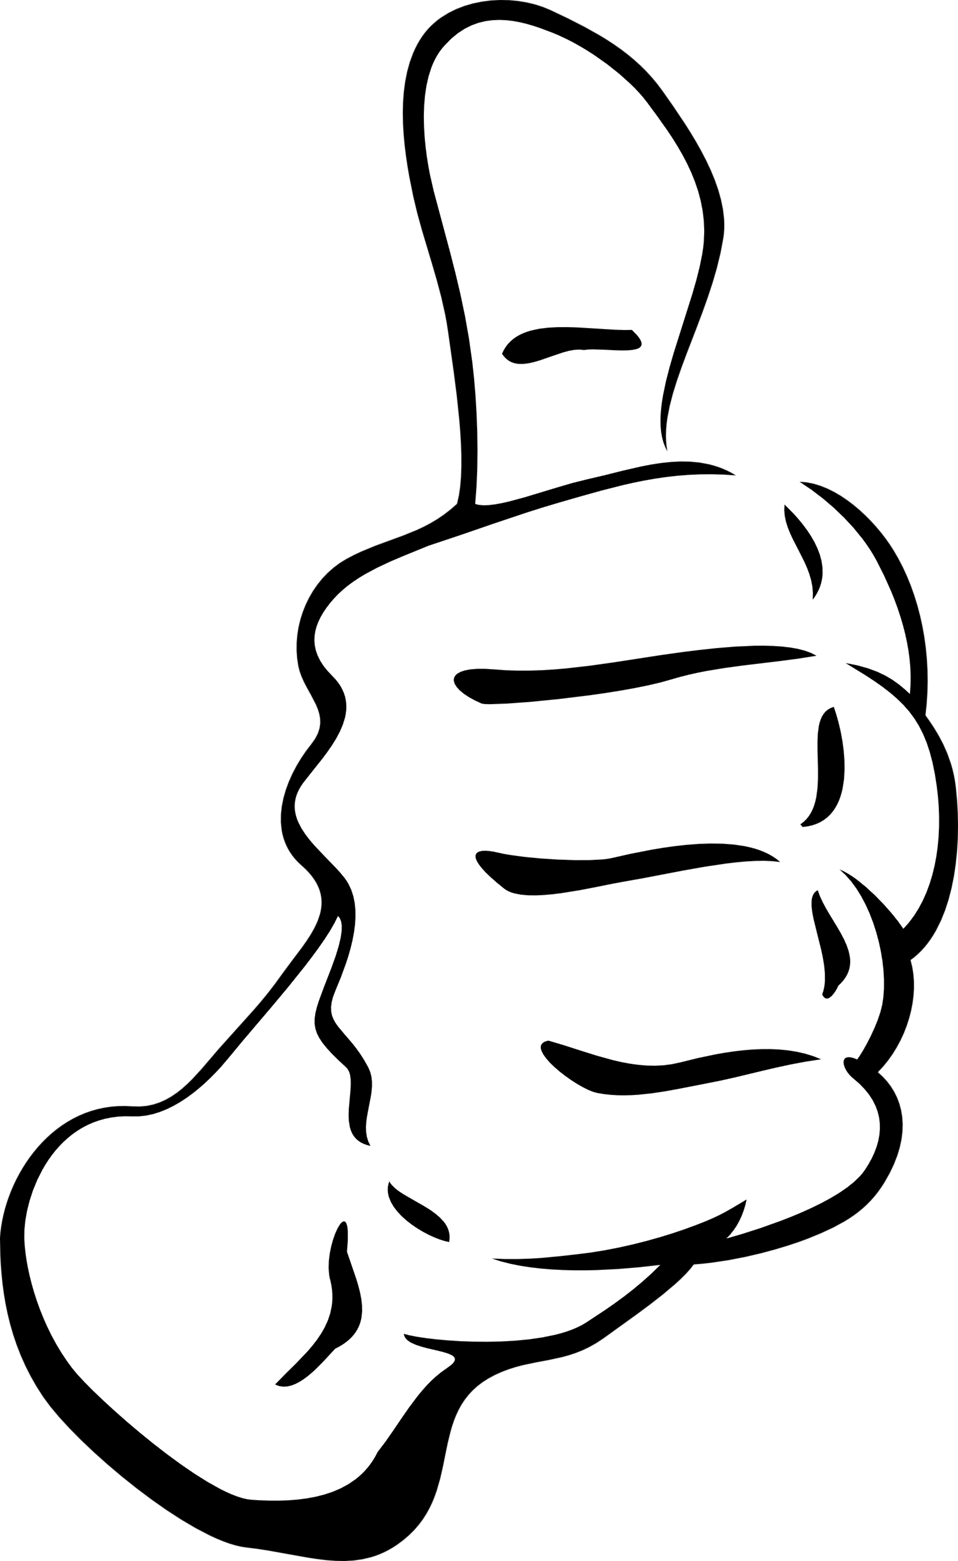 Positive clipart thumbs down. Up drawing at getdrawings